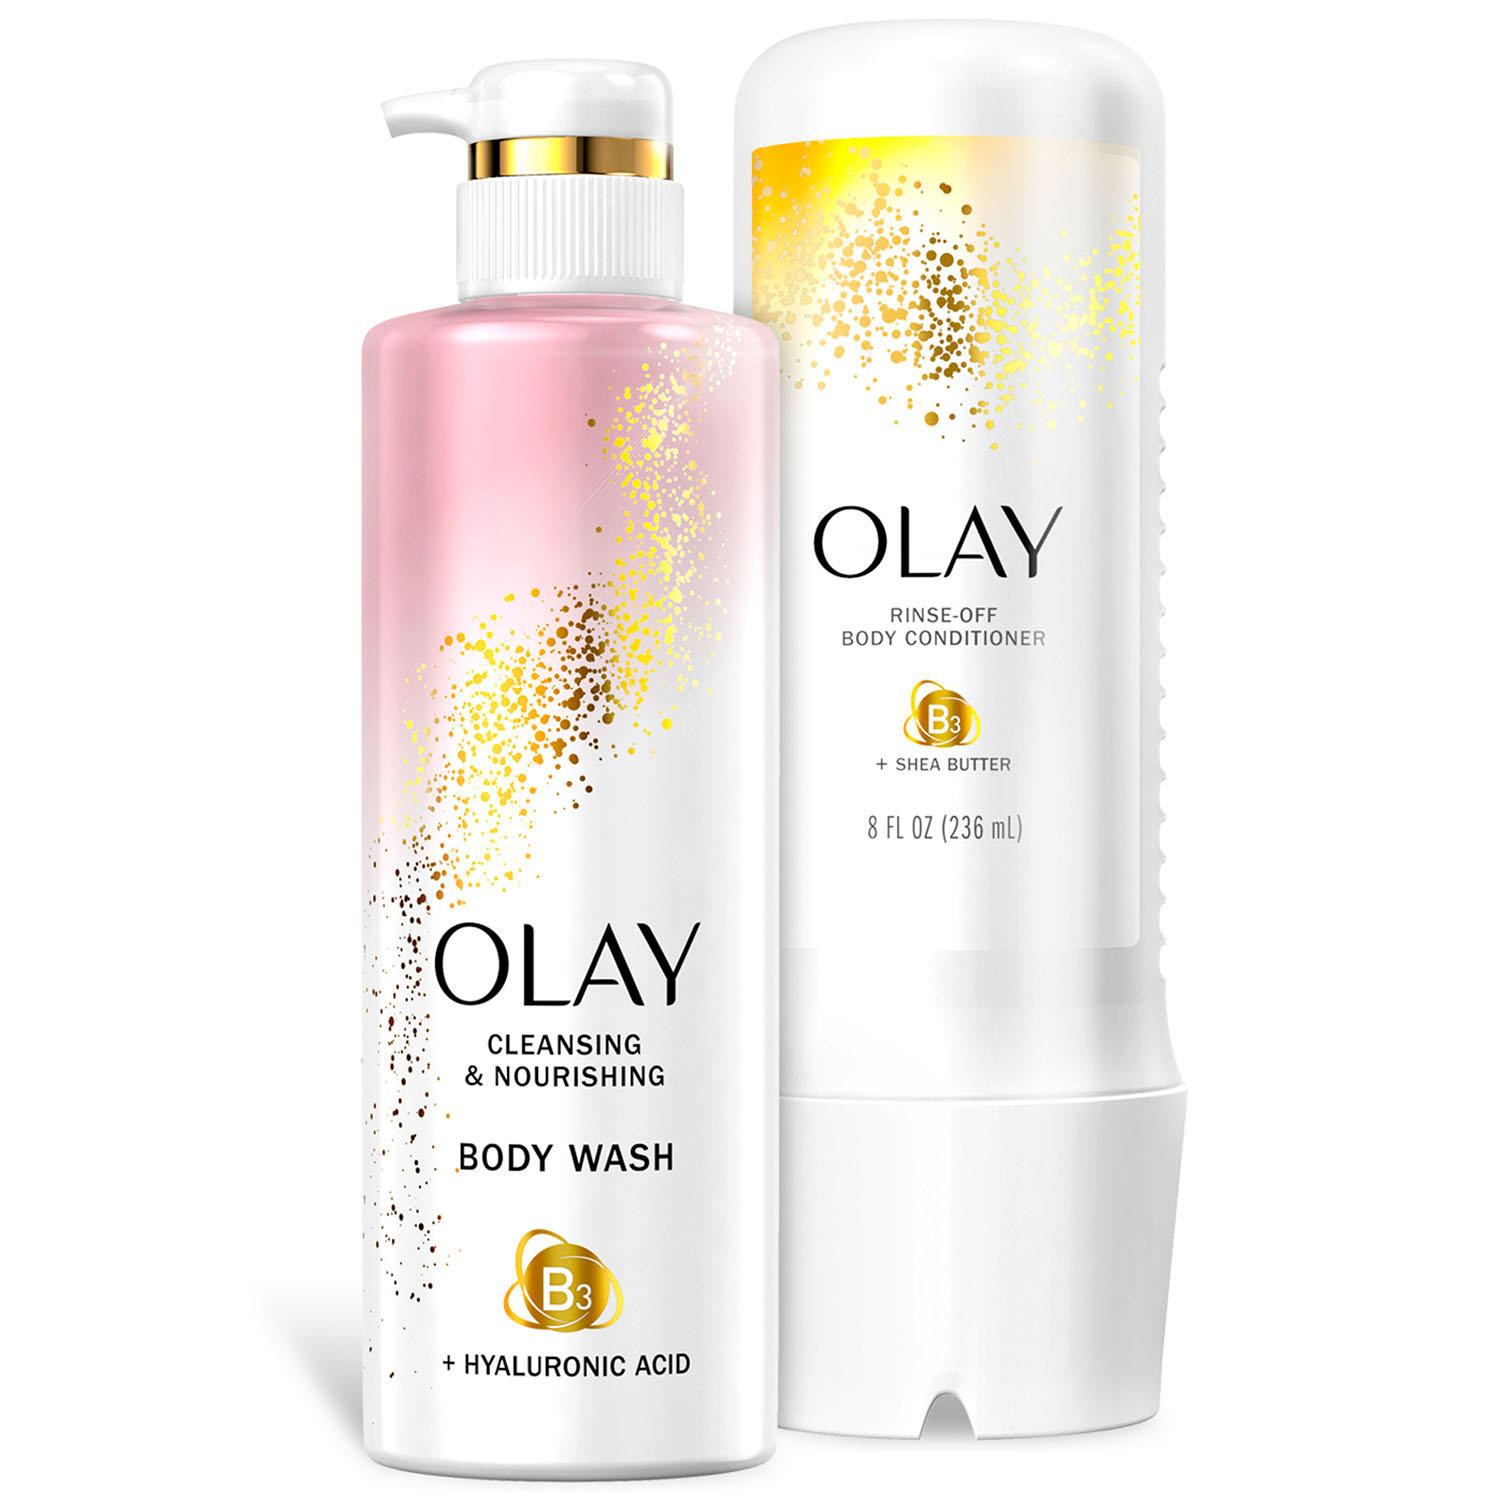 Bottles of Olay cleansing &amp;amp; nourishing body wash and rinse-off body conditioner